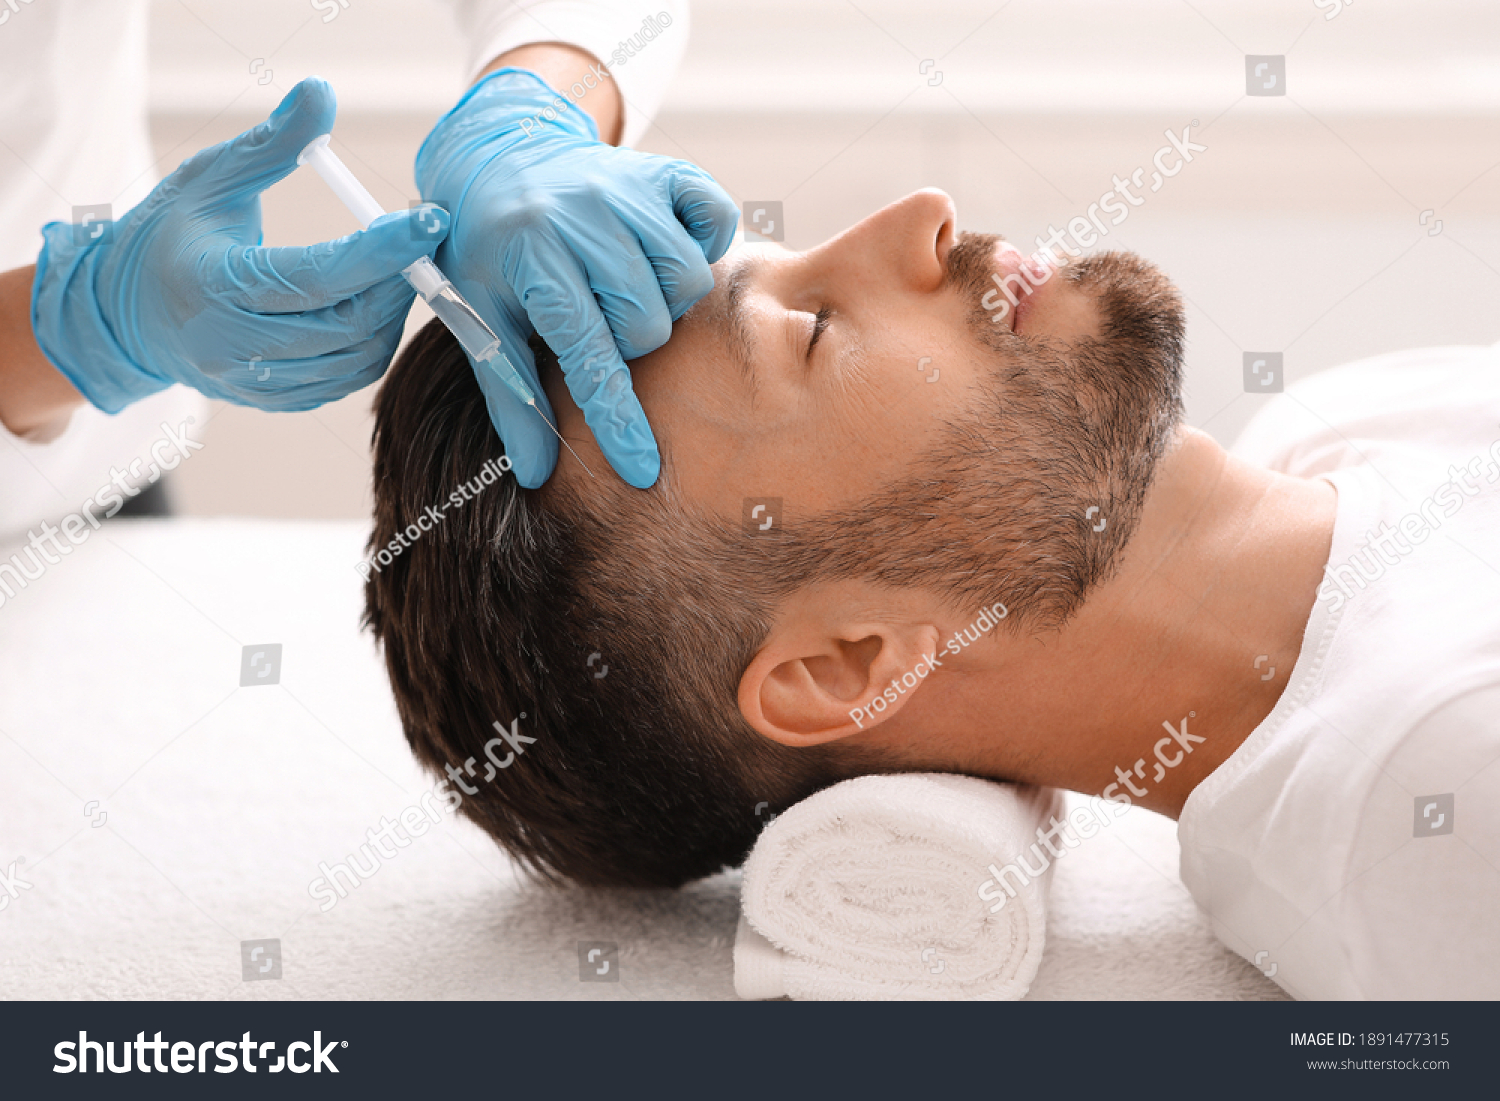 Side view of handsome middle aged man getting hair treatment at beauty salon. Man having mesotherapy session at aesthetic clinic, therapist hands in gloves making injection in scalp, closeup #1891477315